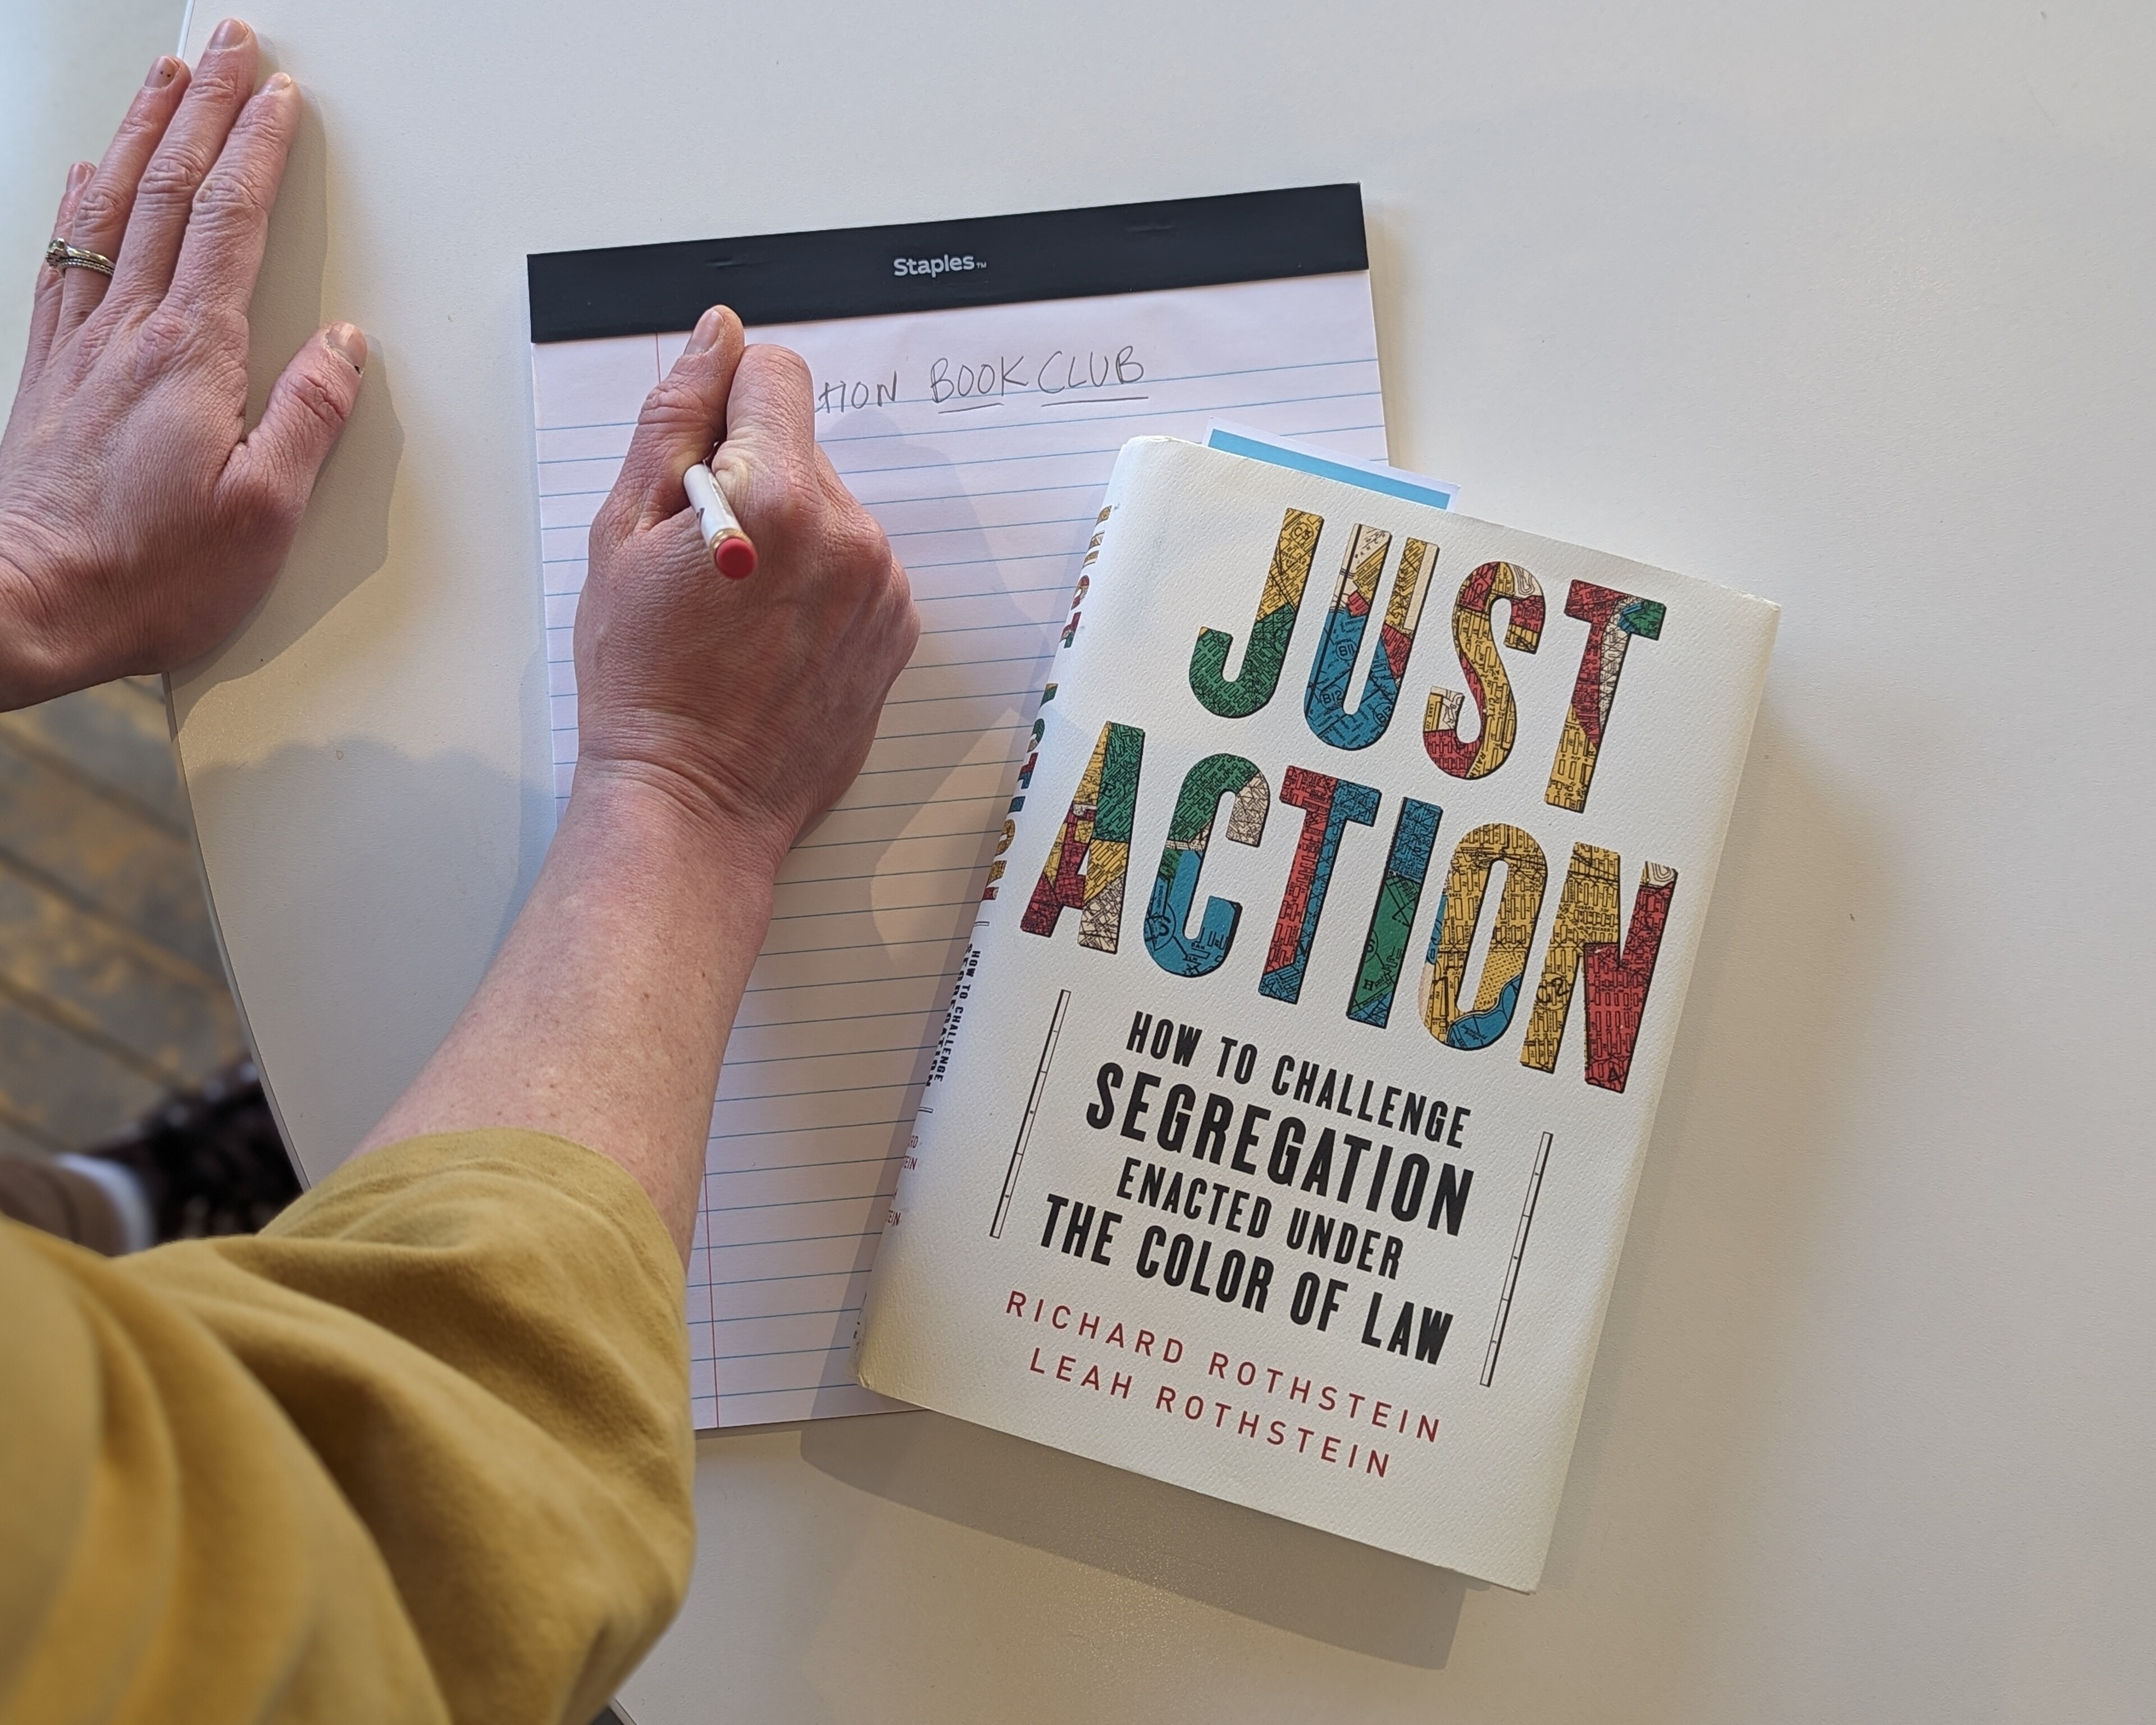 Photo of Just Action book and notepad with "Book Club" written on front